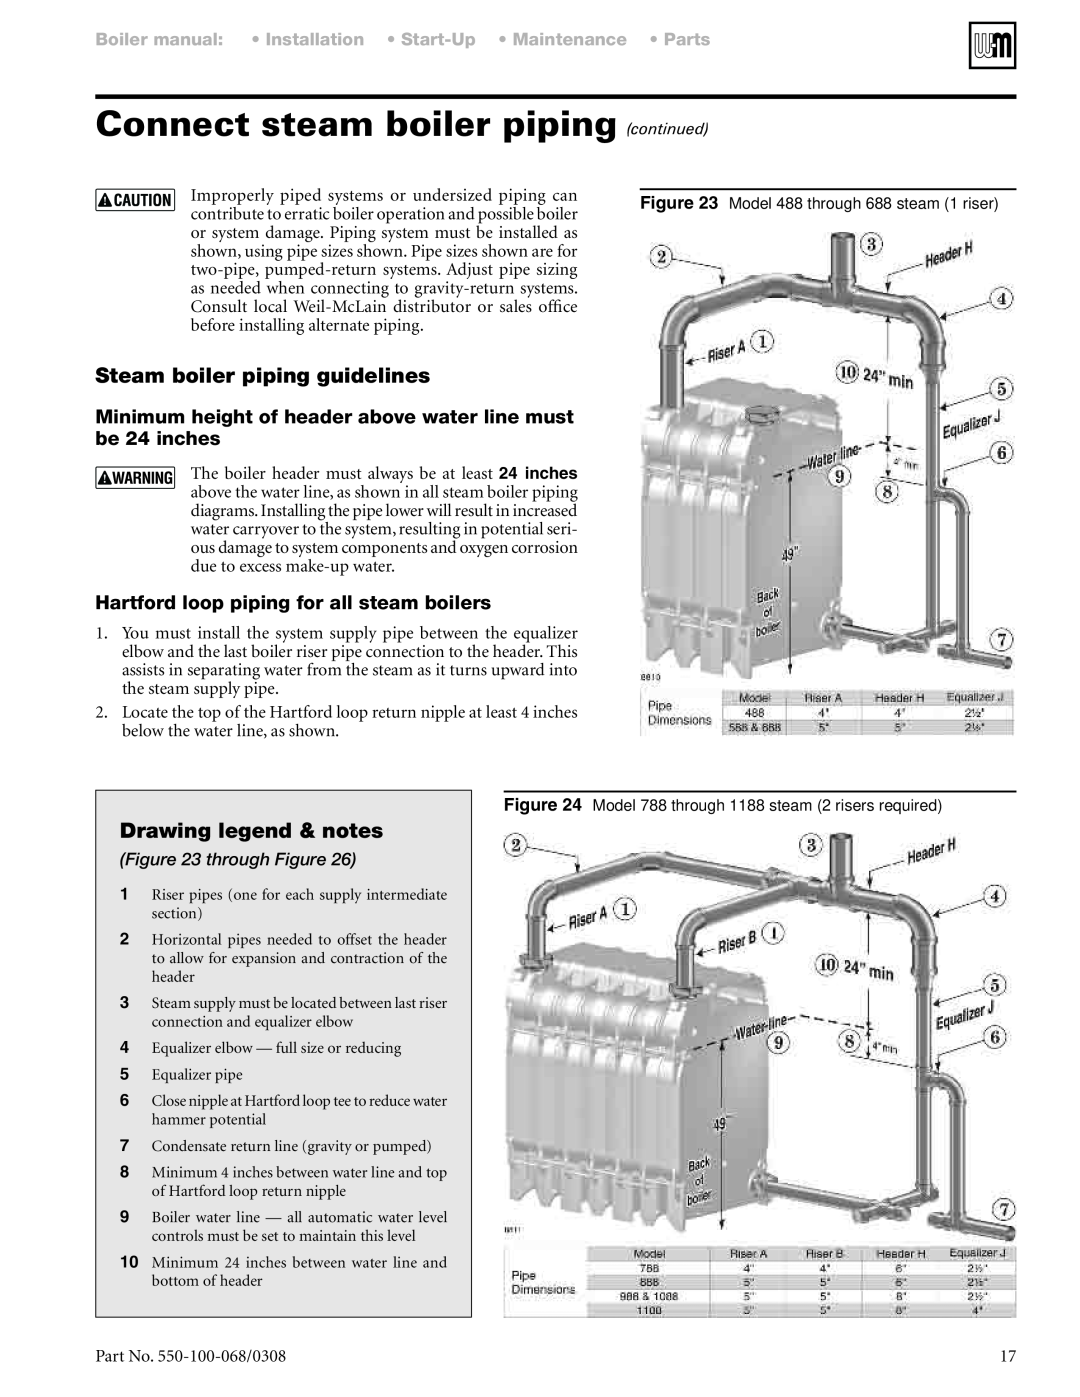 Weil-McLain 88 manual Steam boiler piping guidelines, Drawing legend & notes, Connect steam boiler piping, through Figure 